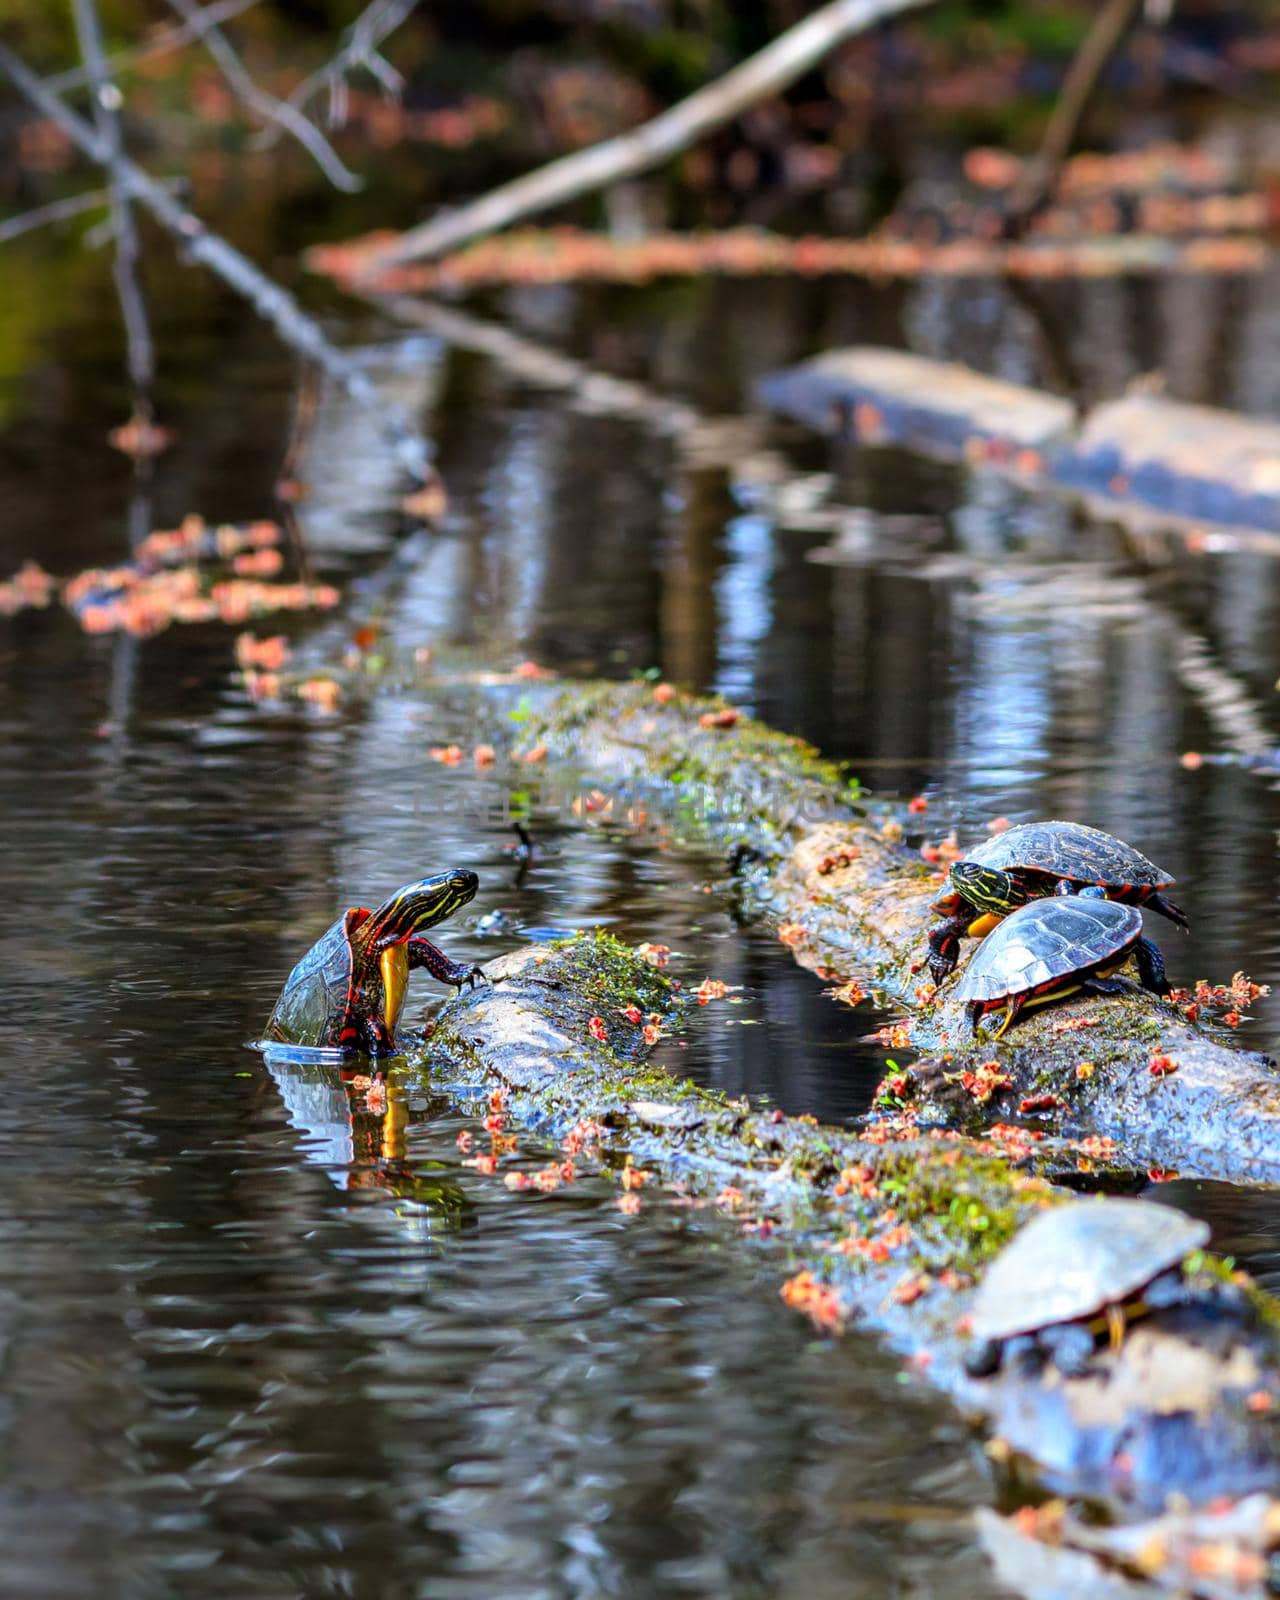 Painted turtle climbing out of water by colintemple